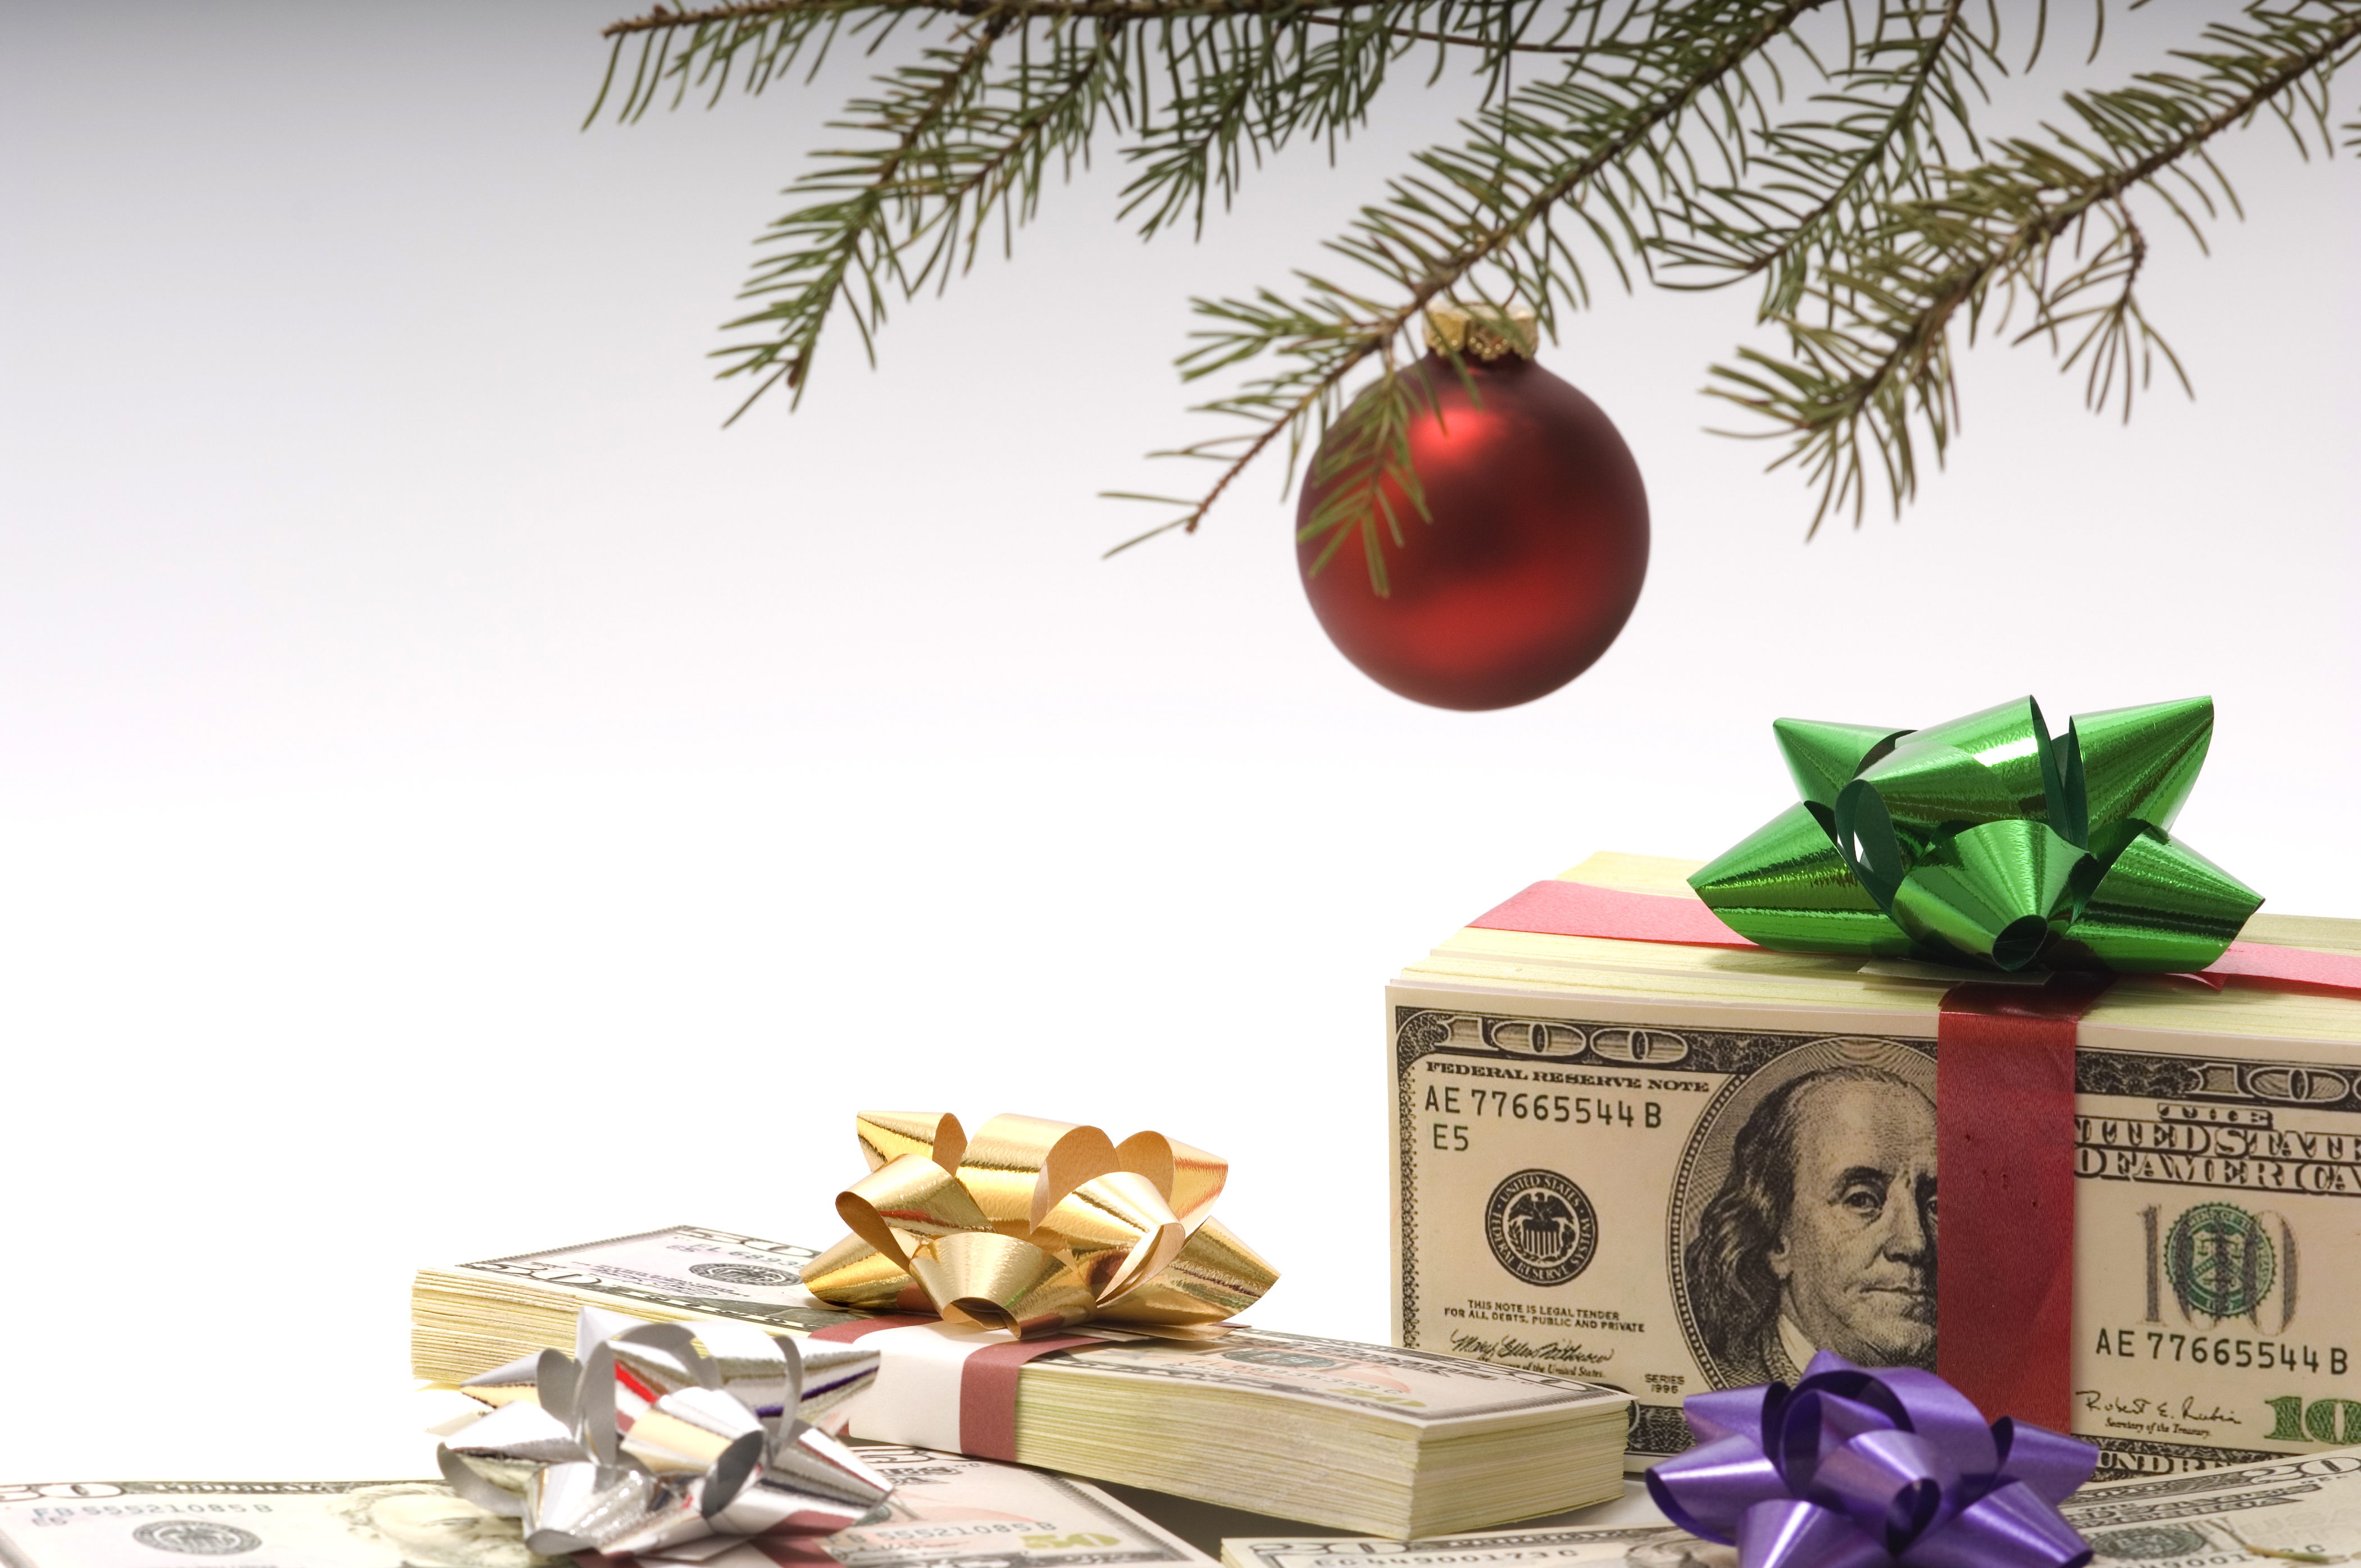 What Most Americans Wish for Around the Holidays Is a Miracle That Would Make Their Debt Disappear